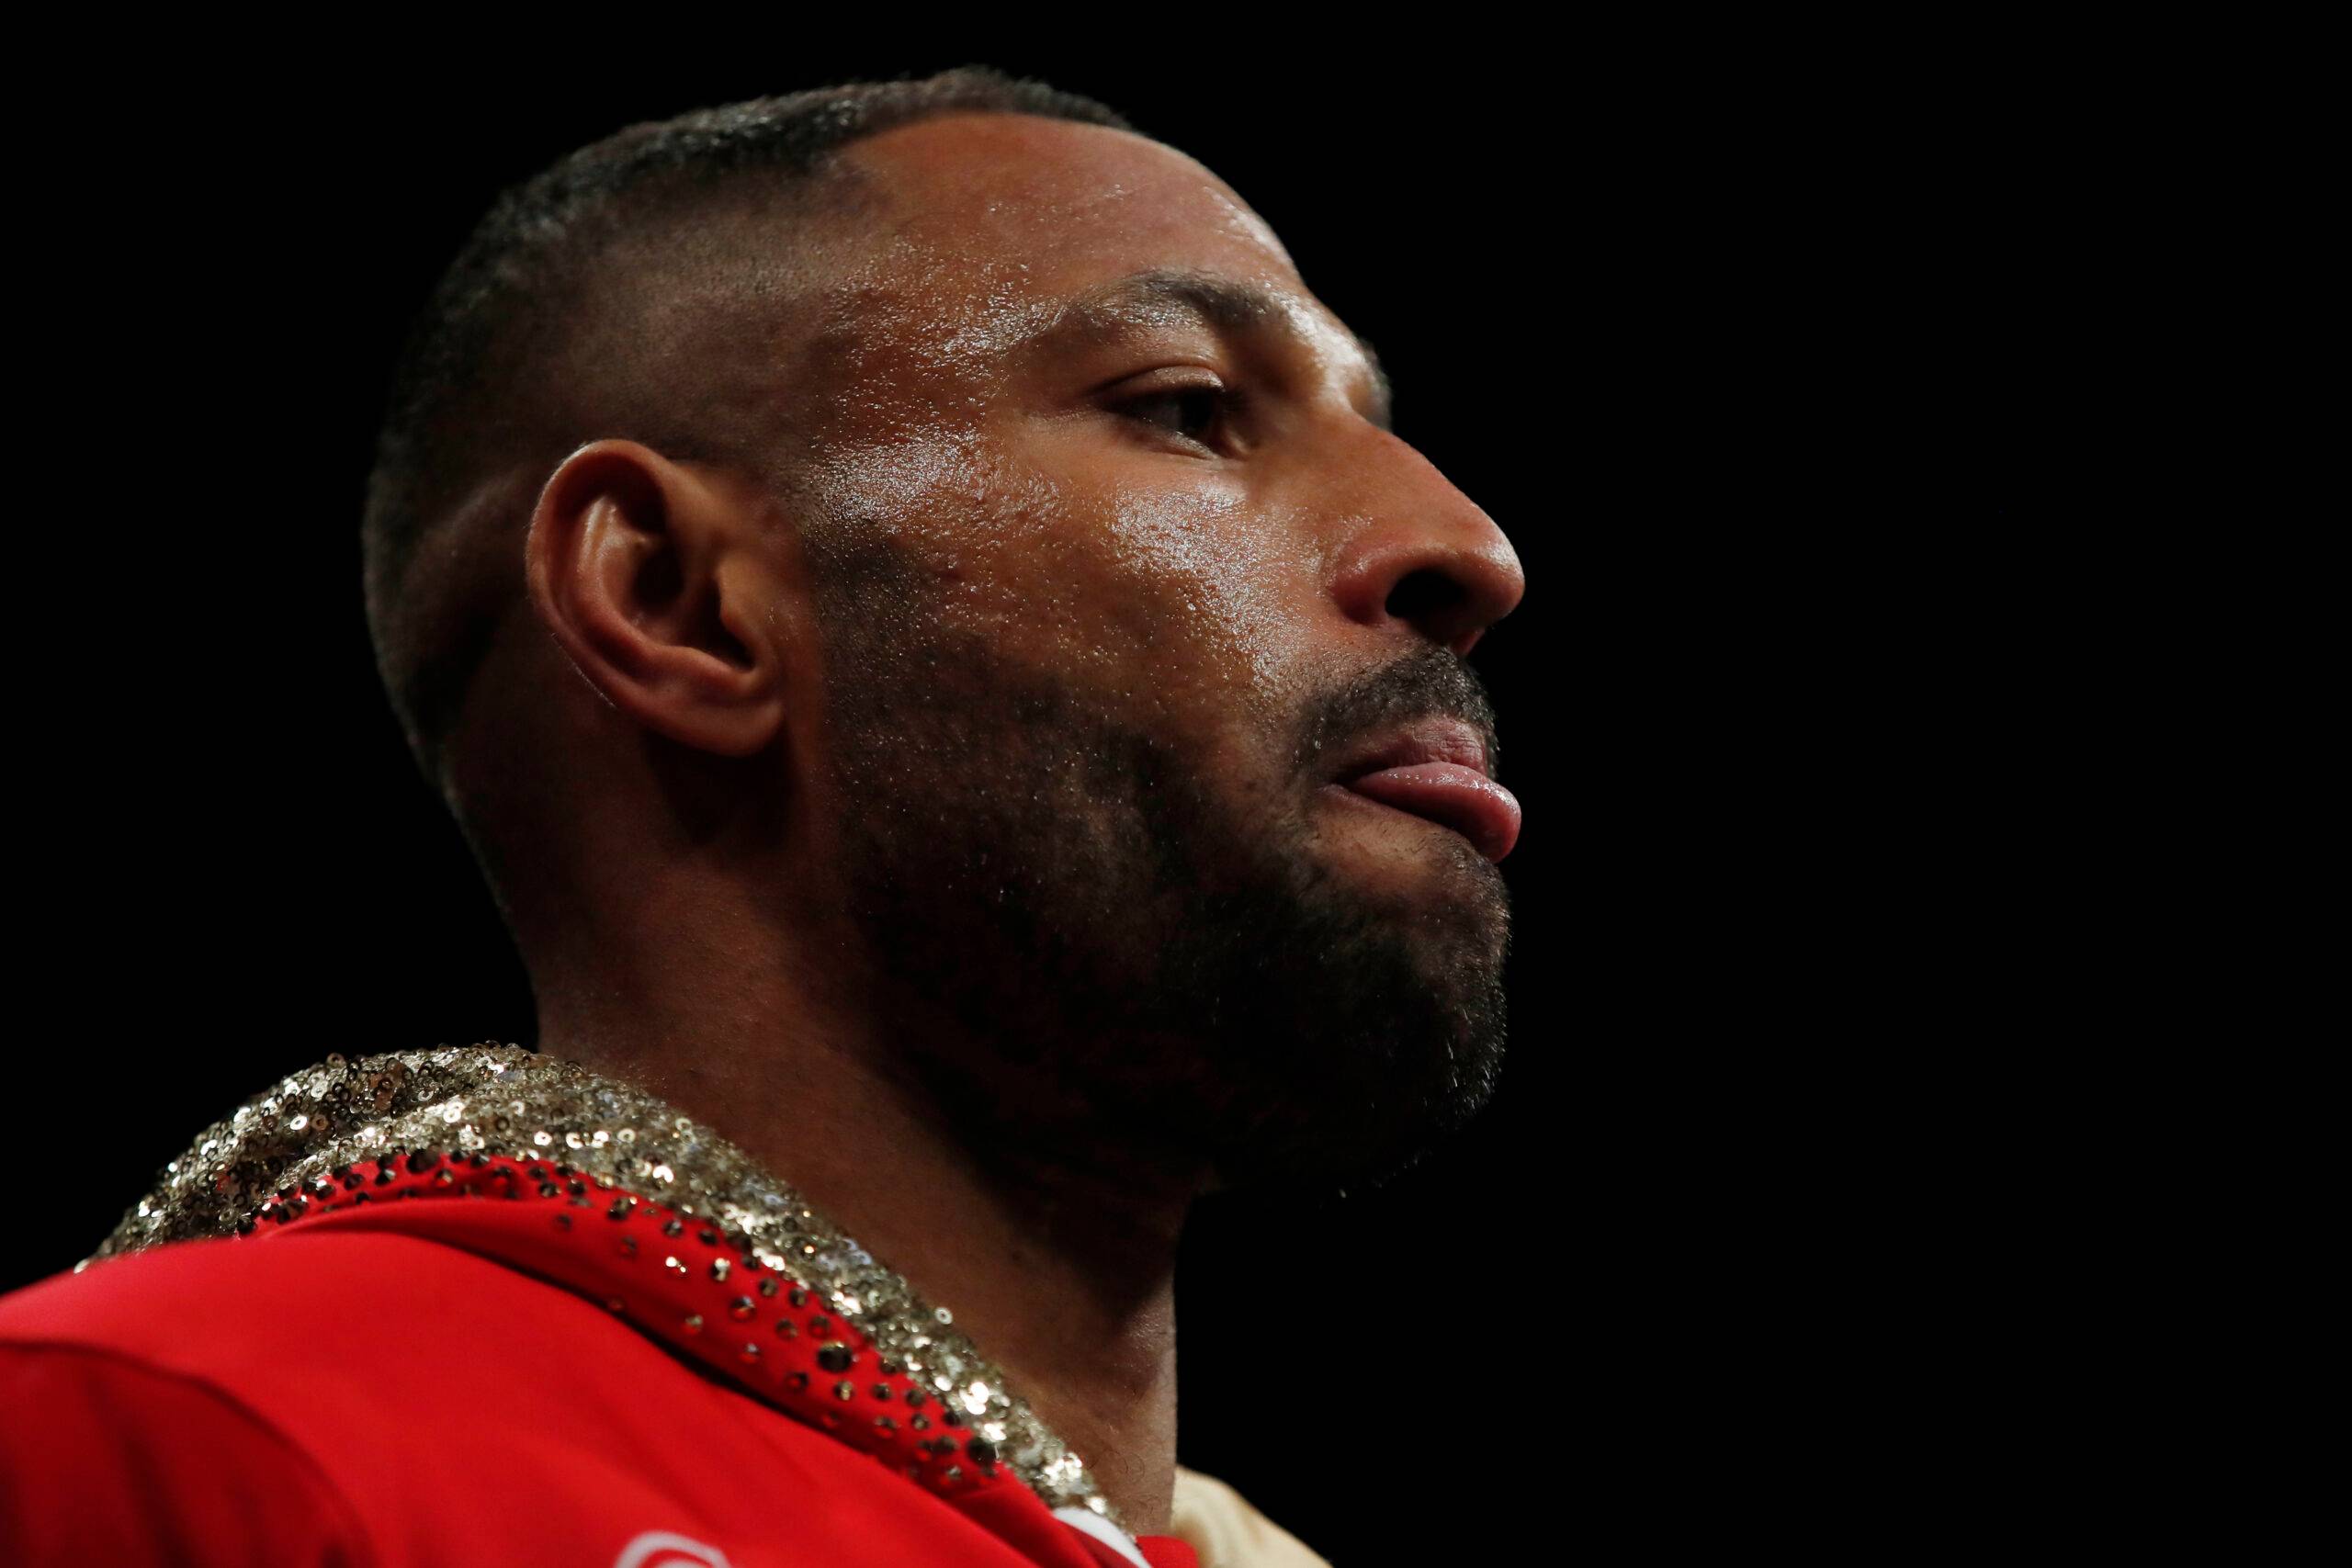 Kell Brook could come out of retirement to fight the winner of Chris Eubank Jr vs Conor Benn